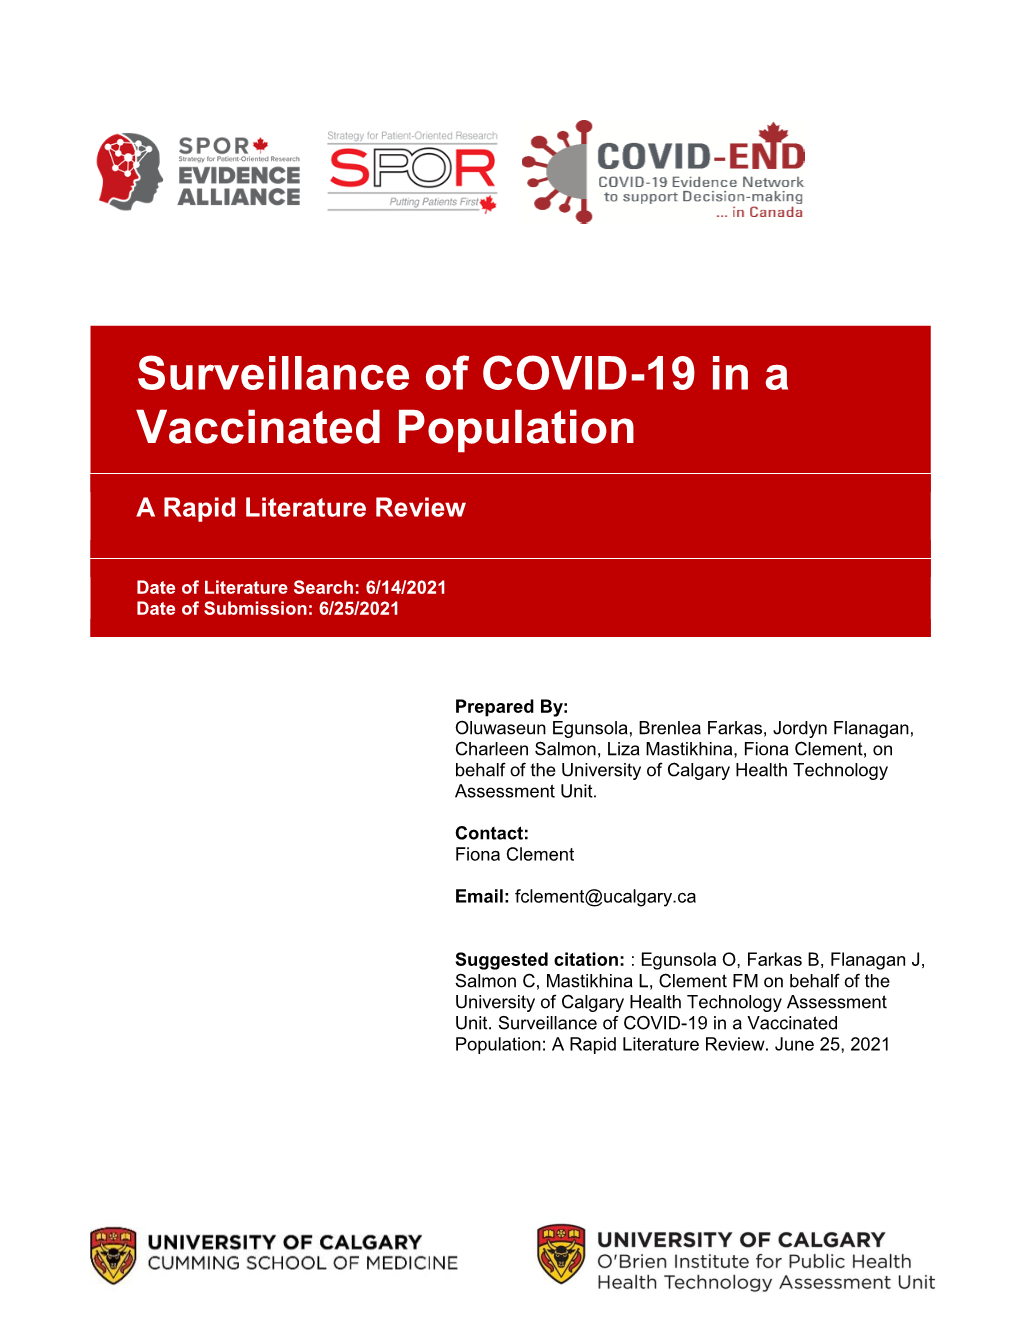 Surveillance of COVID-19 in a Vaccinated Population